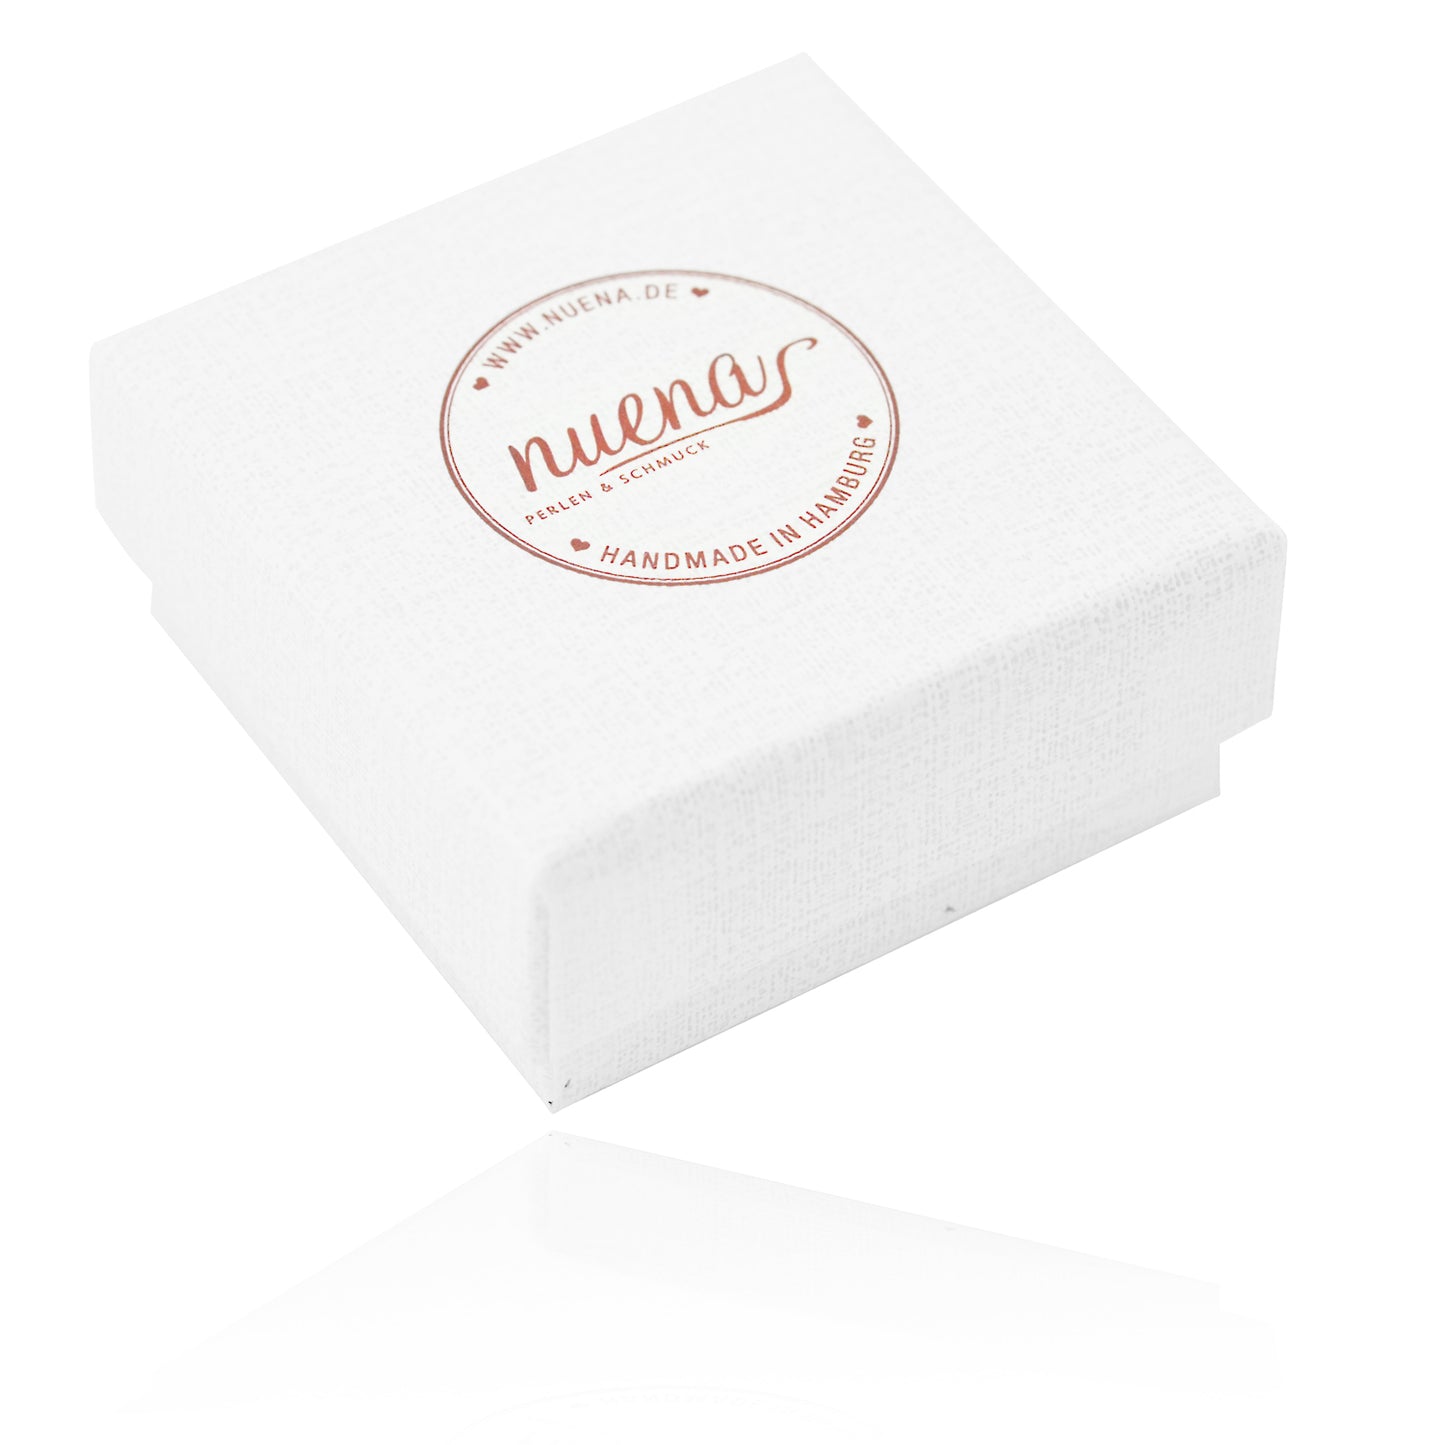 NUENA gift box white with logo / 65 mm